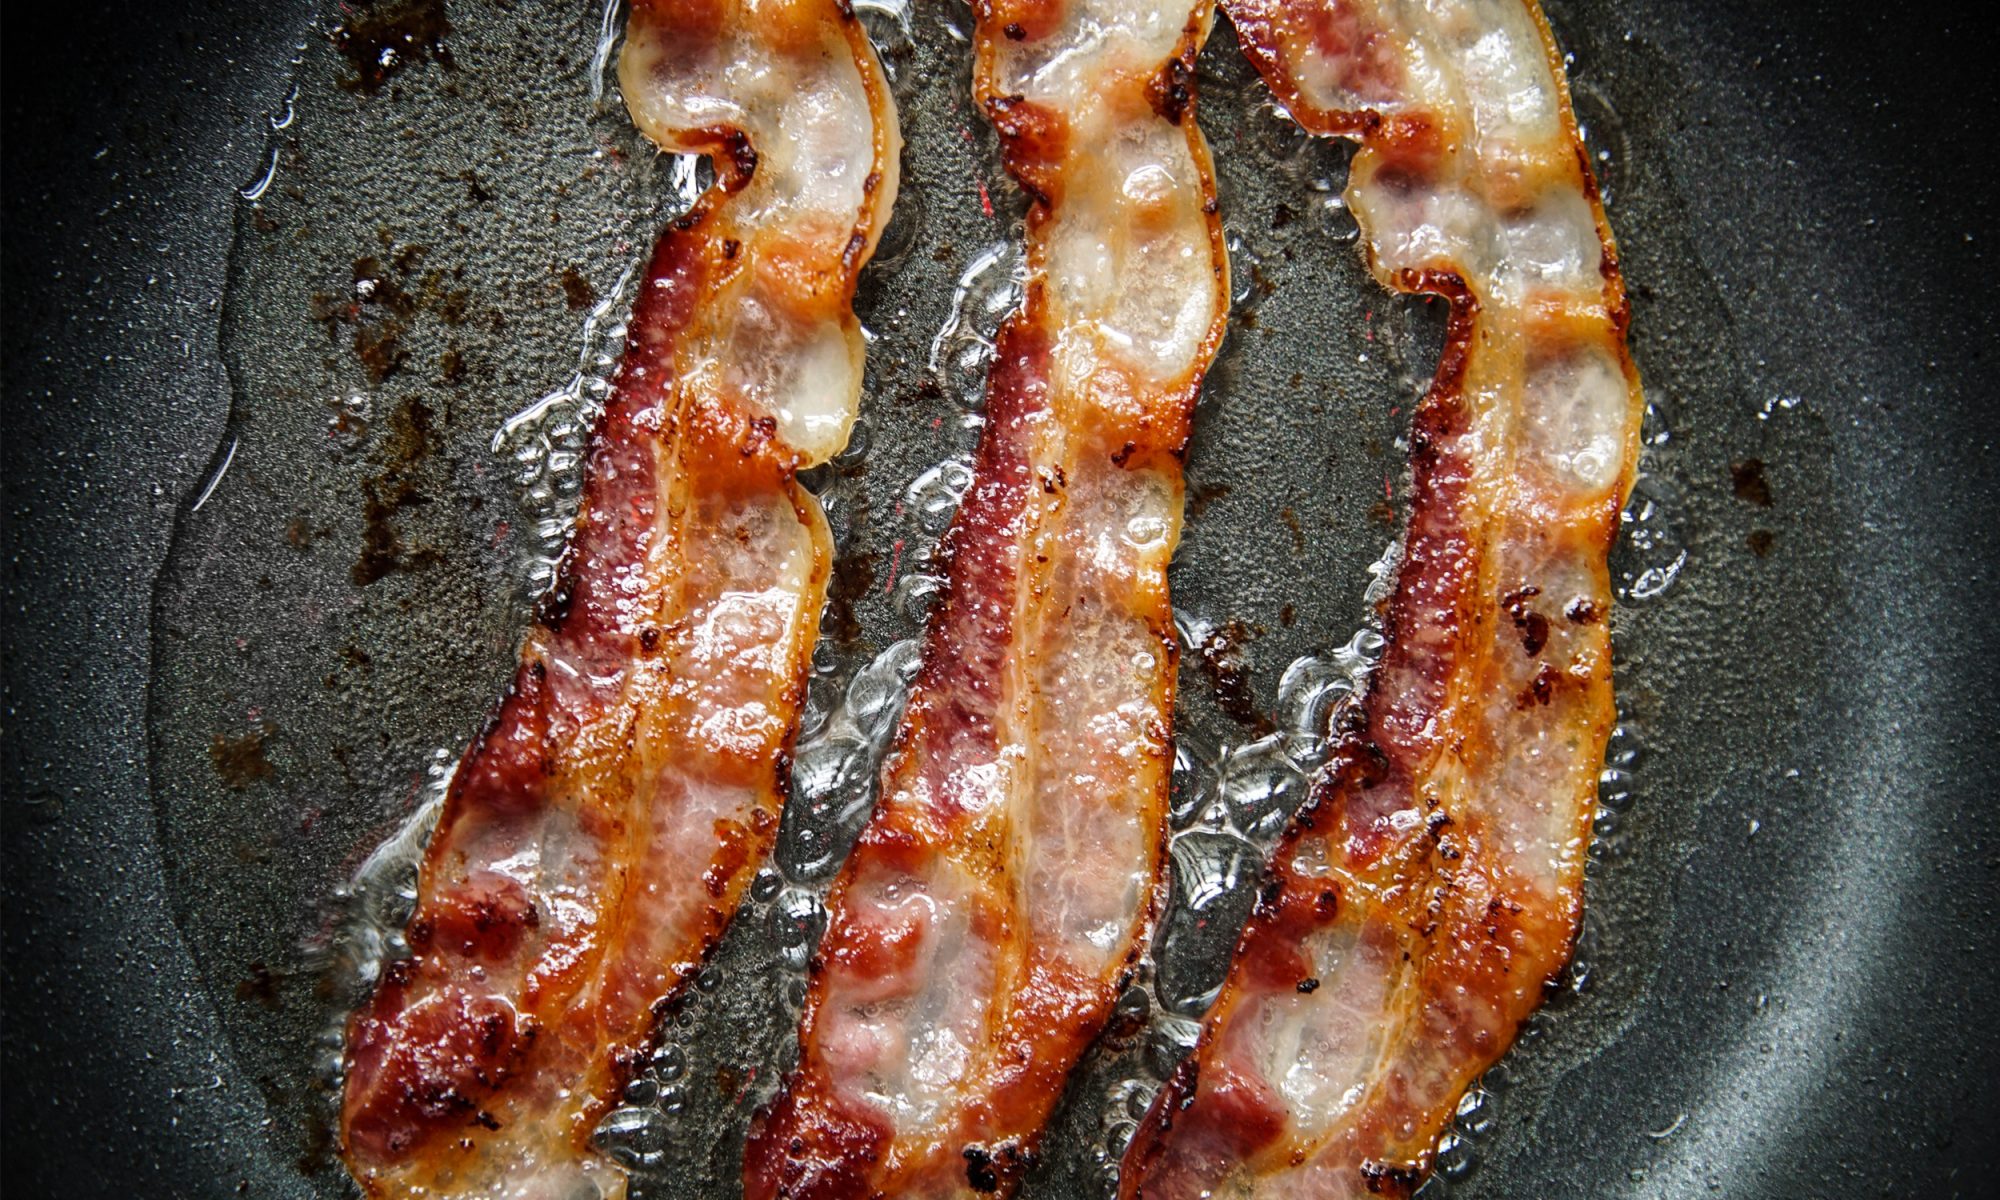 https://static.onecms.io/wp-content/uploads/sites/19/2018/02/13/field-image-use-leftover-bacon-grease-2000.jpg